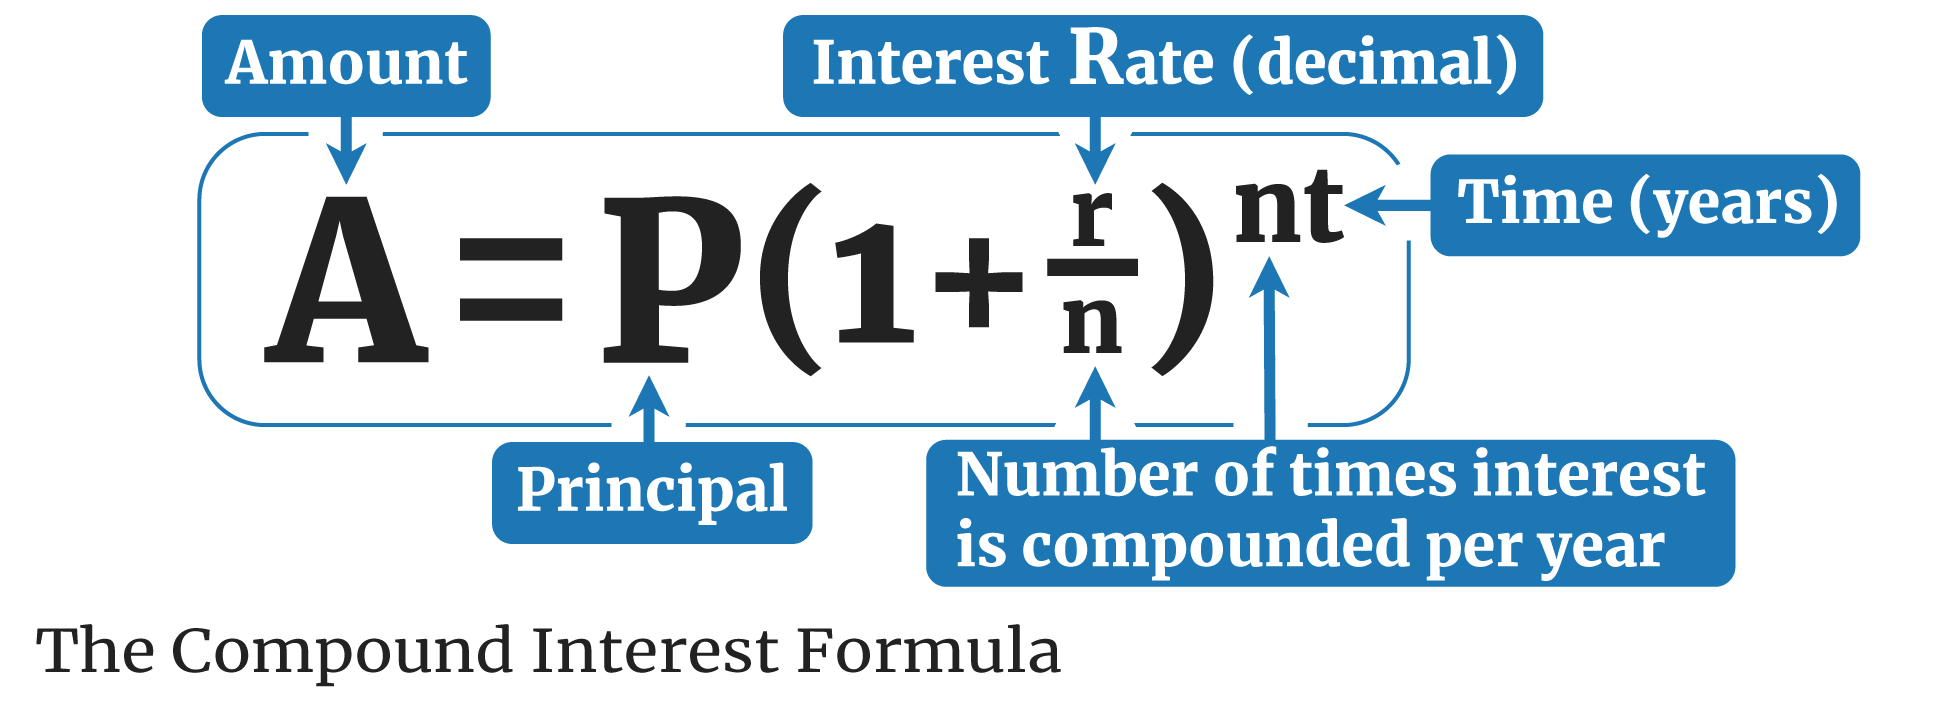 Interest calculator compound daily APY Interest